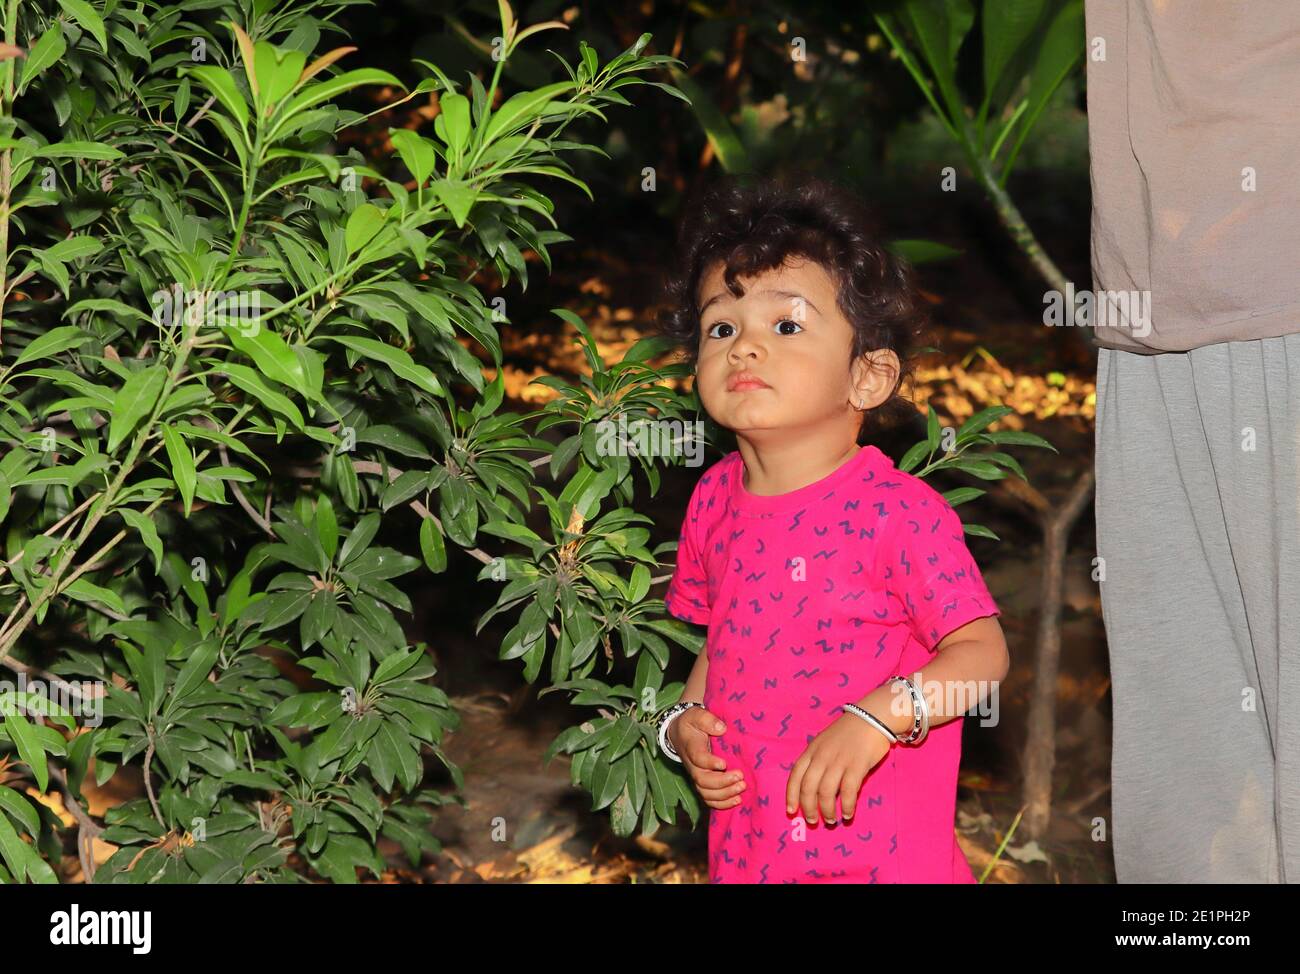 A beautiful Indian child smiles at the Chiku plant in the garden, indian child portrait in garden Stock Photo